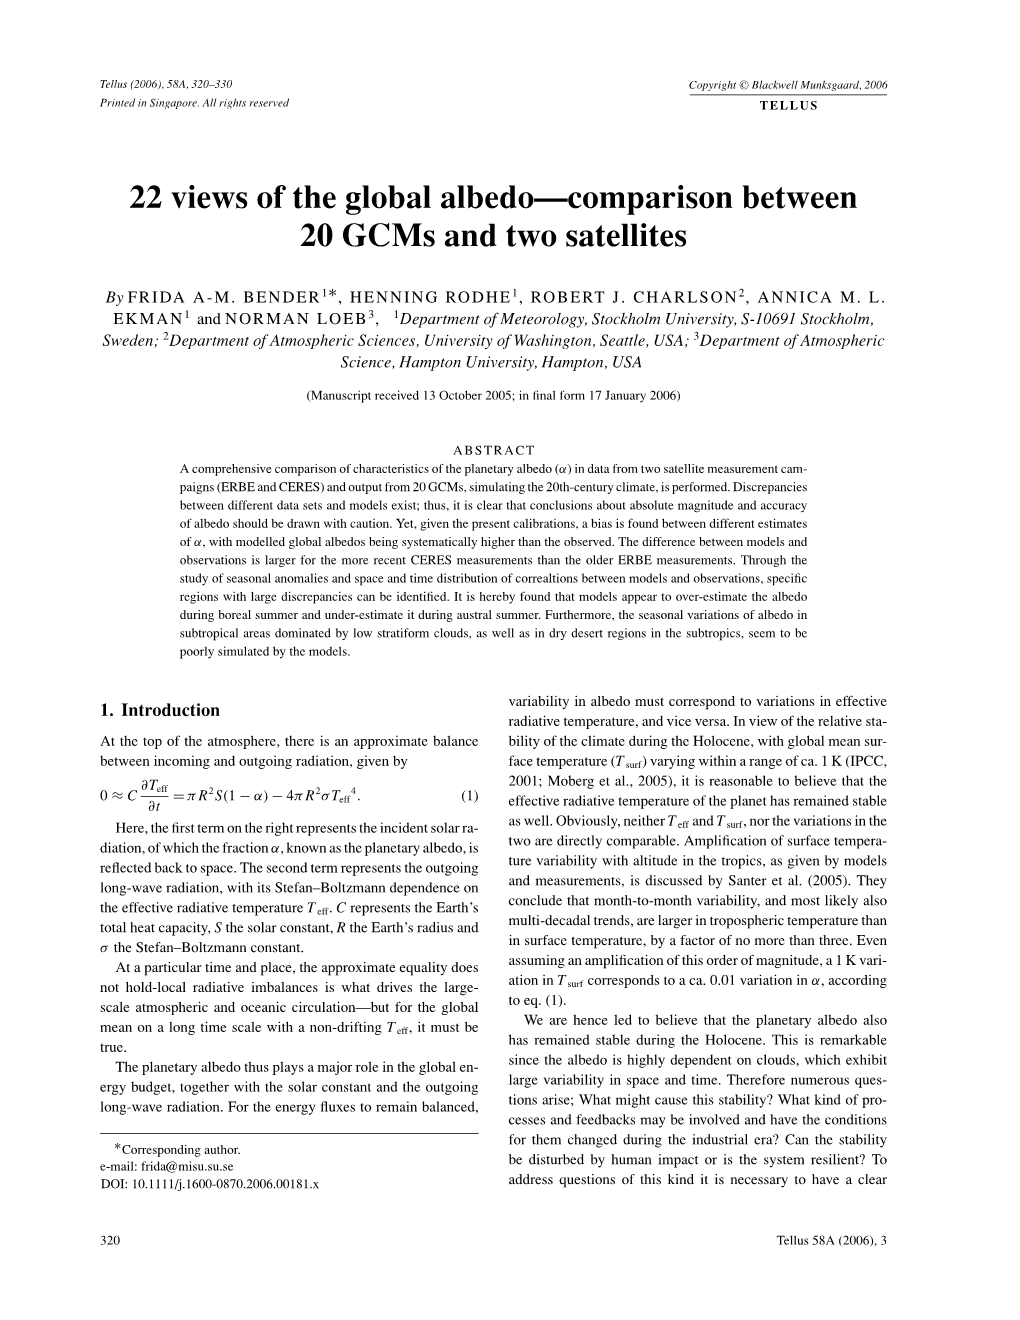 22 Views of the Global Albedo—Comparison Between 20 Gcms and Two Satellites